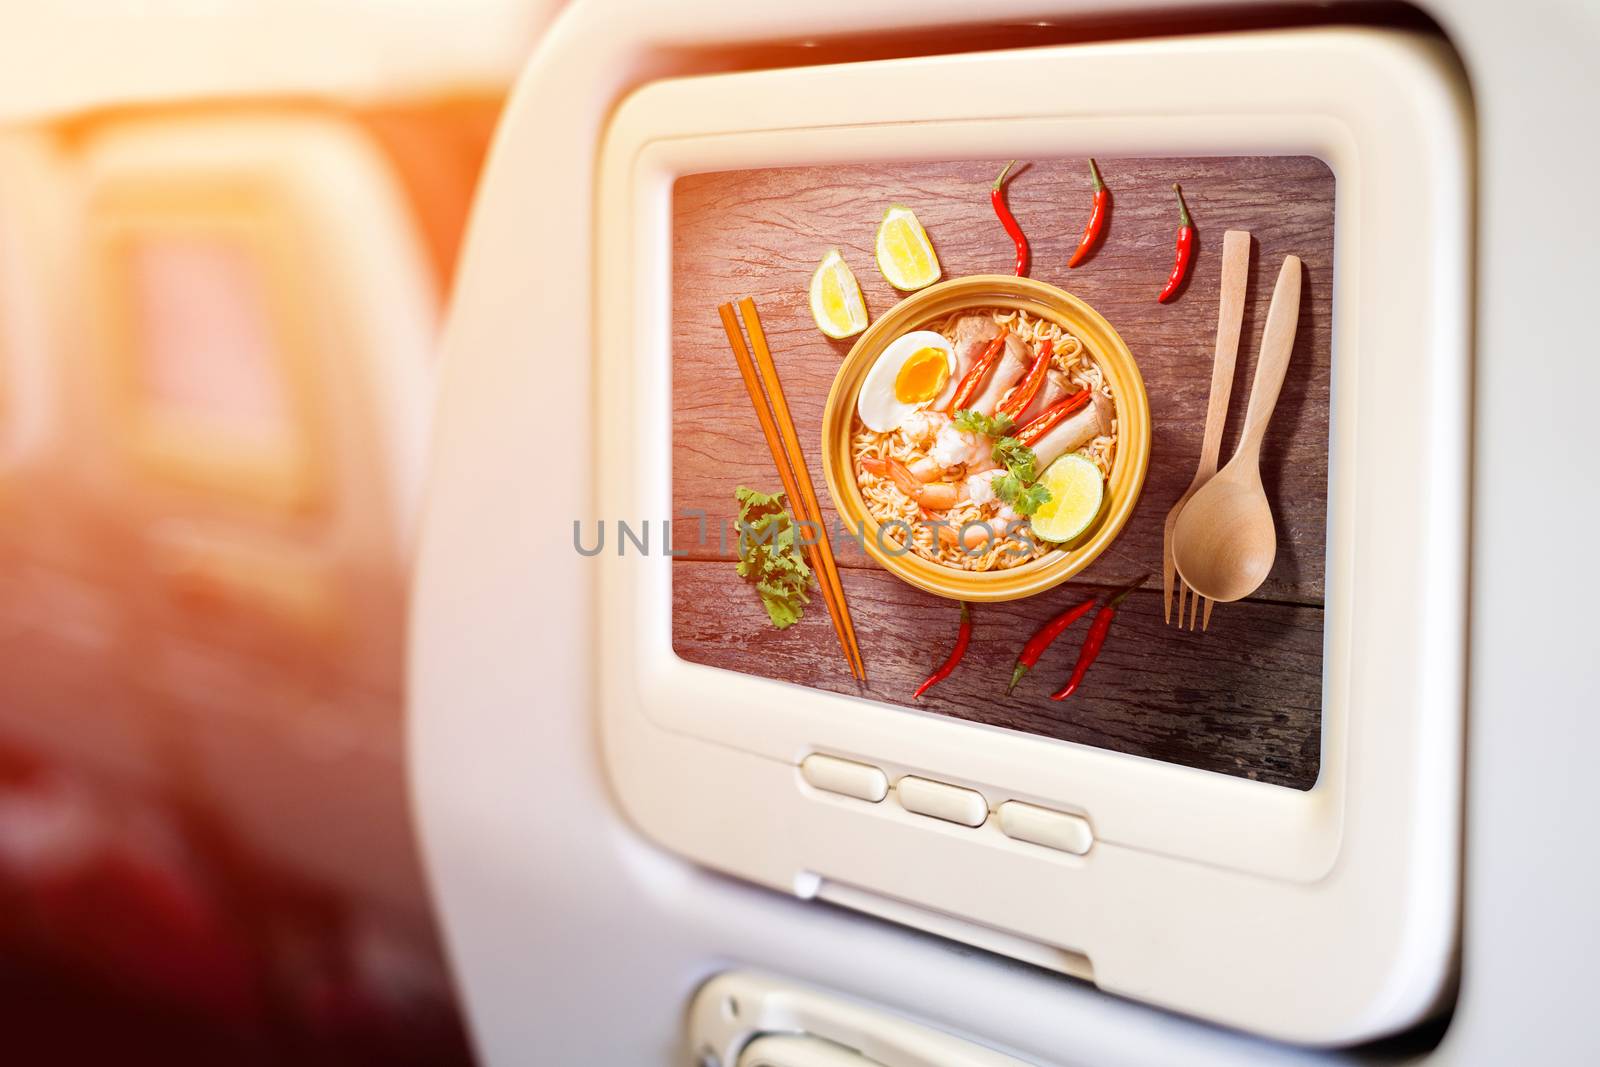 Aircraft monitor in front of passenger seat showing Thai food st by Surasak